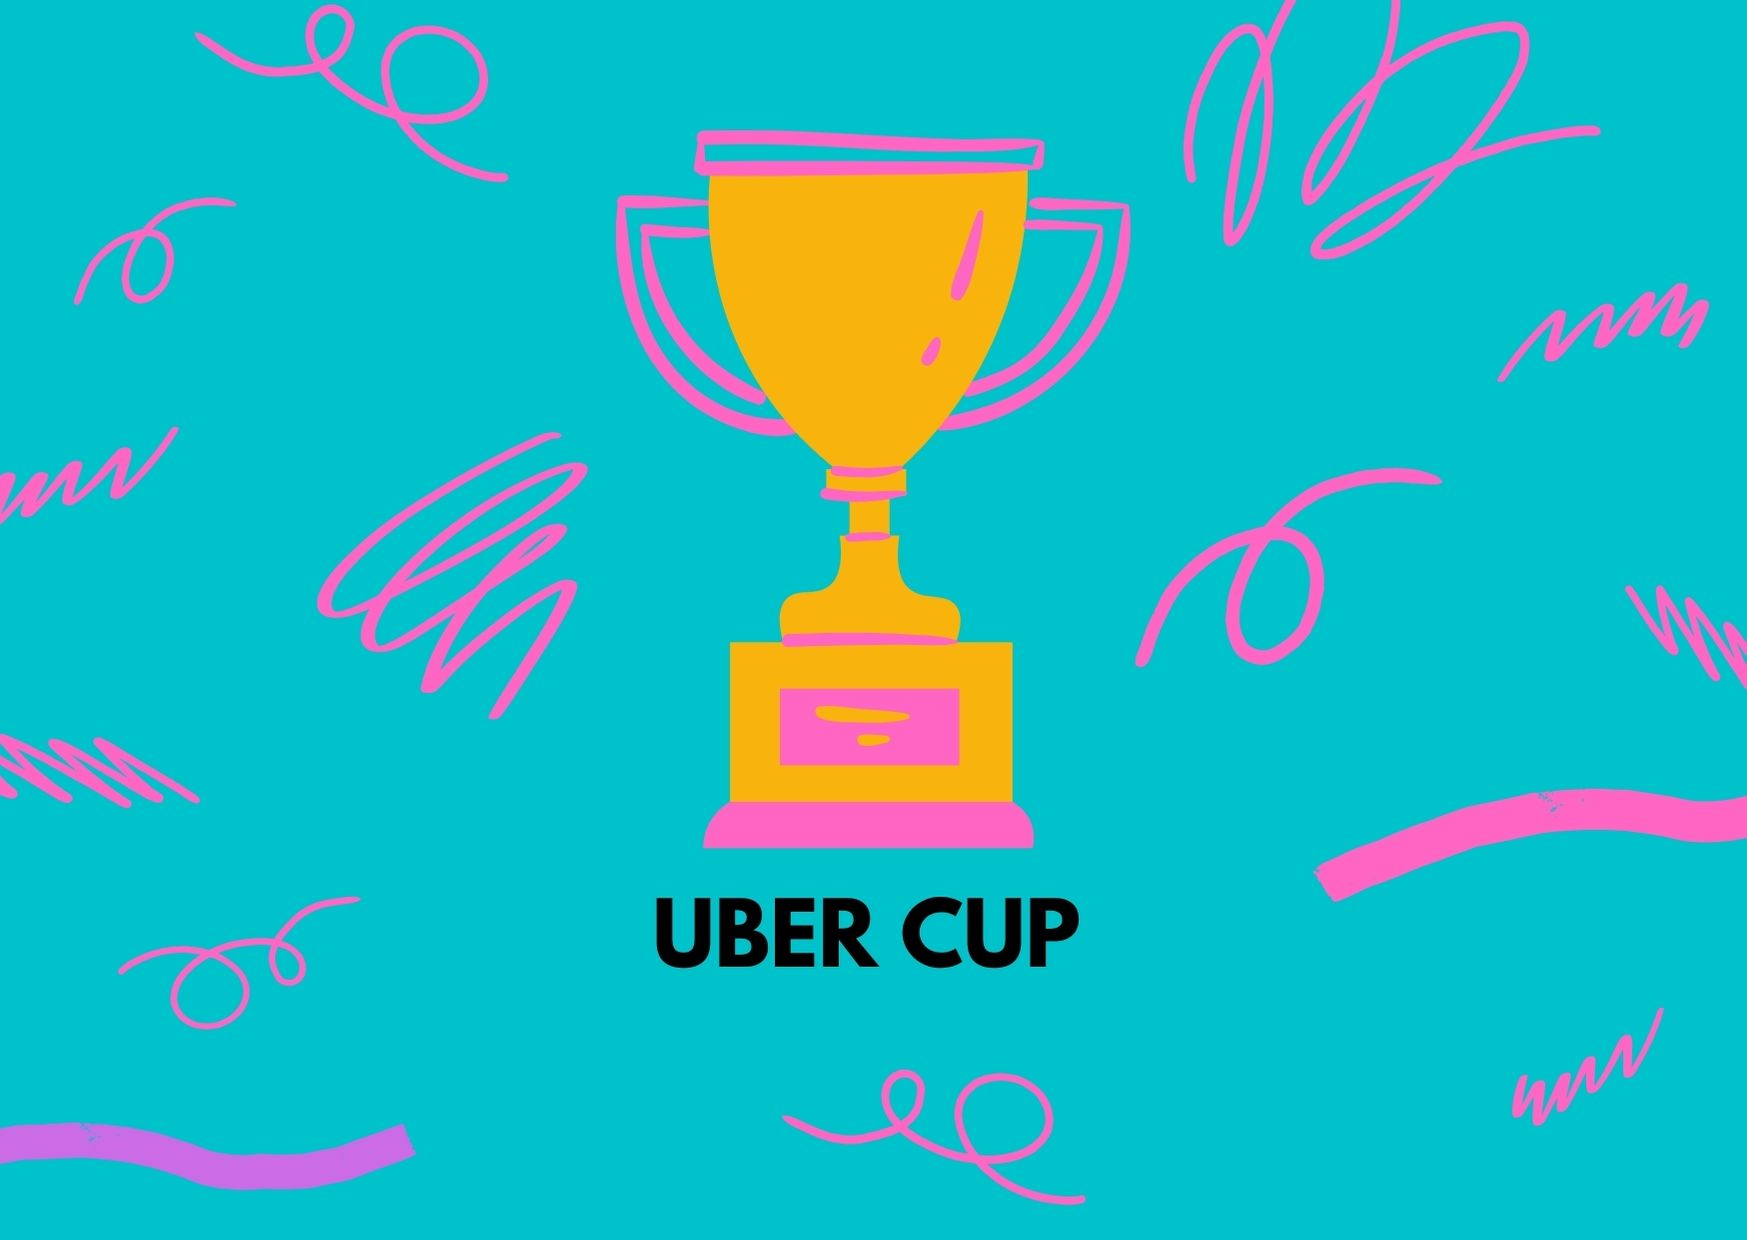 UBER CUP